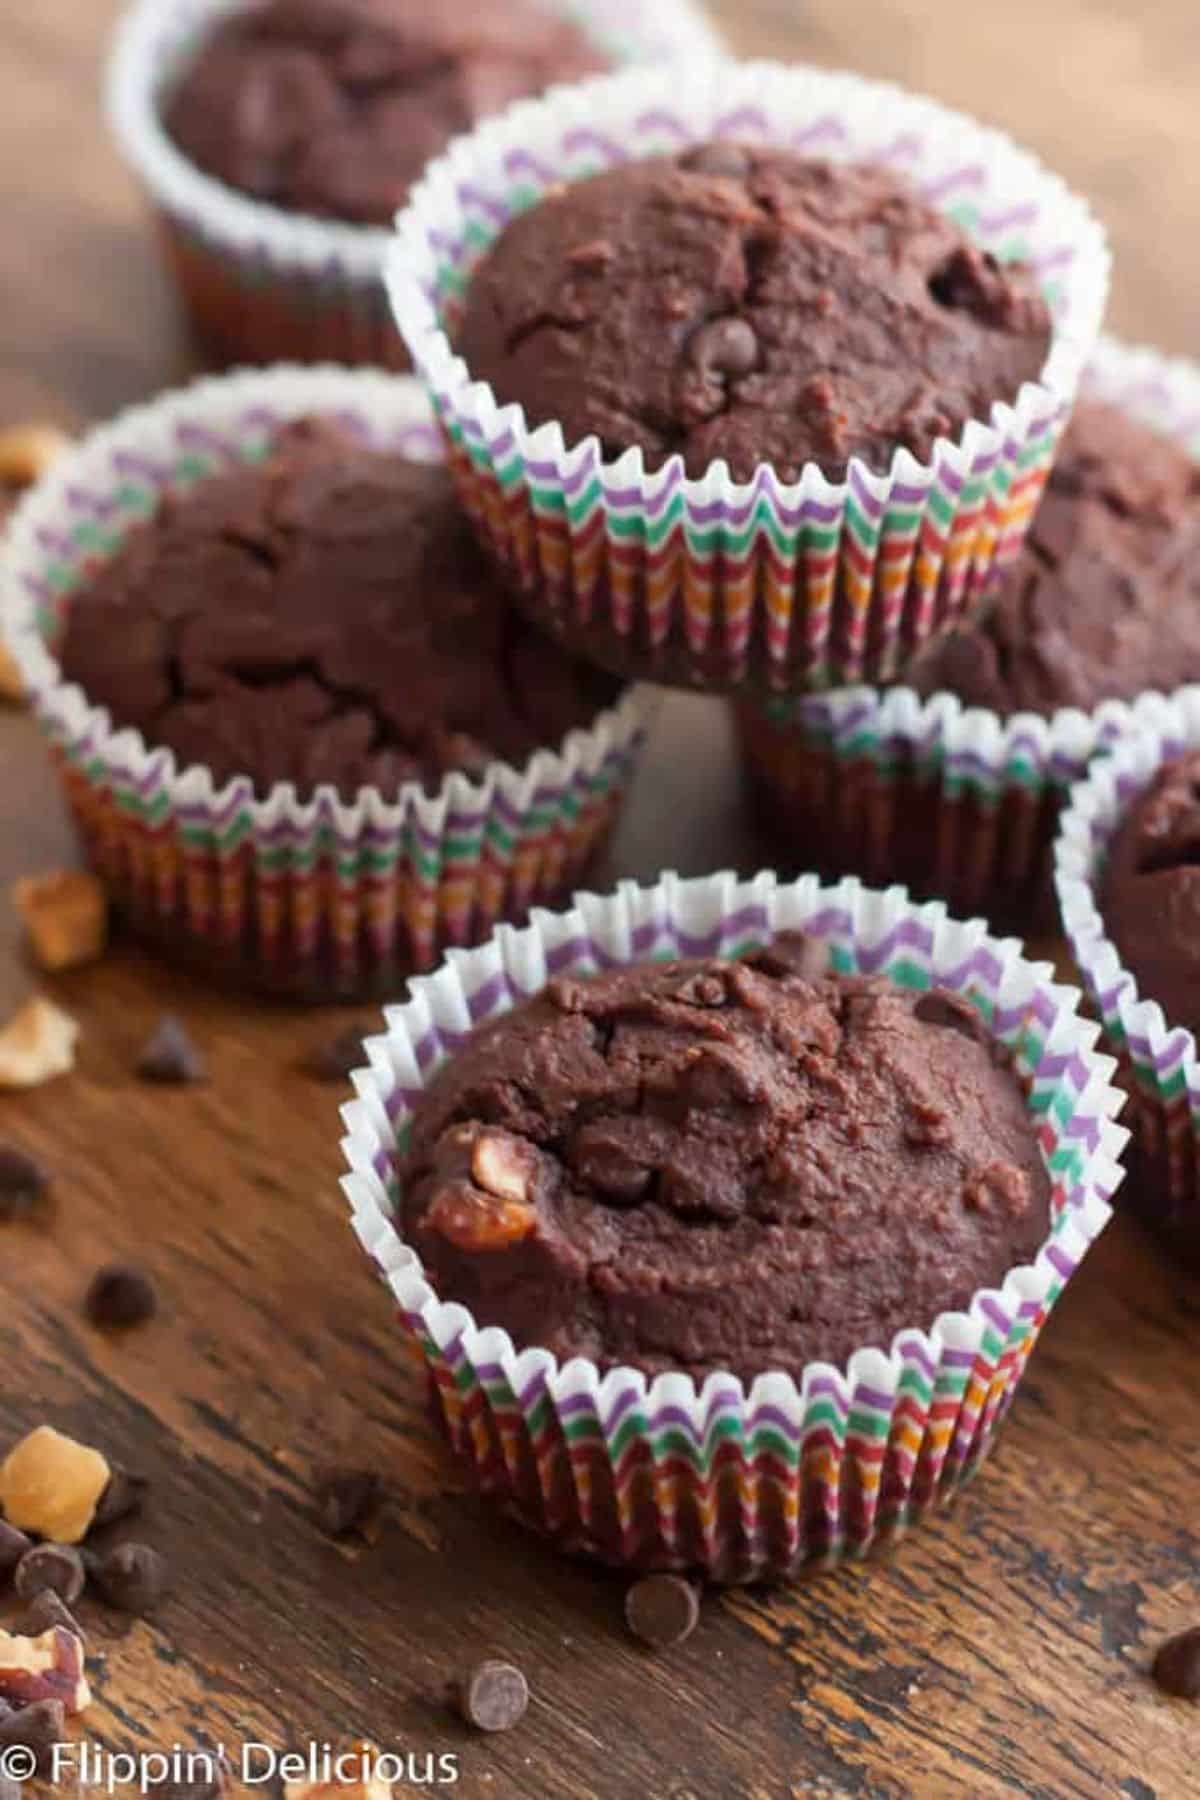 Mouth-watering Gluten-Free Chocolate Hazelnut Muffins on a wooden table.